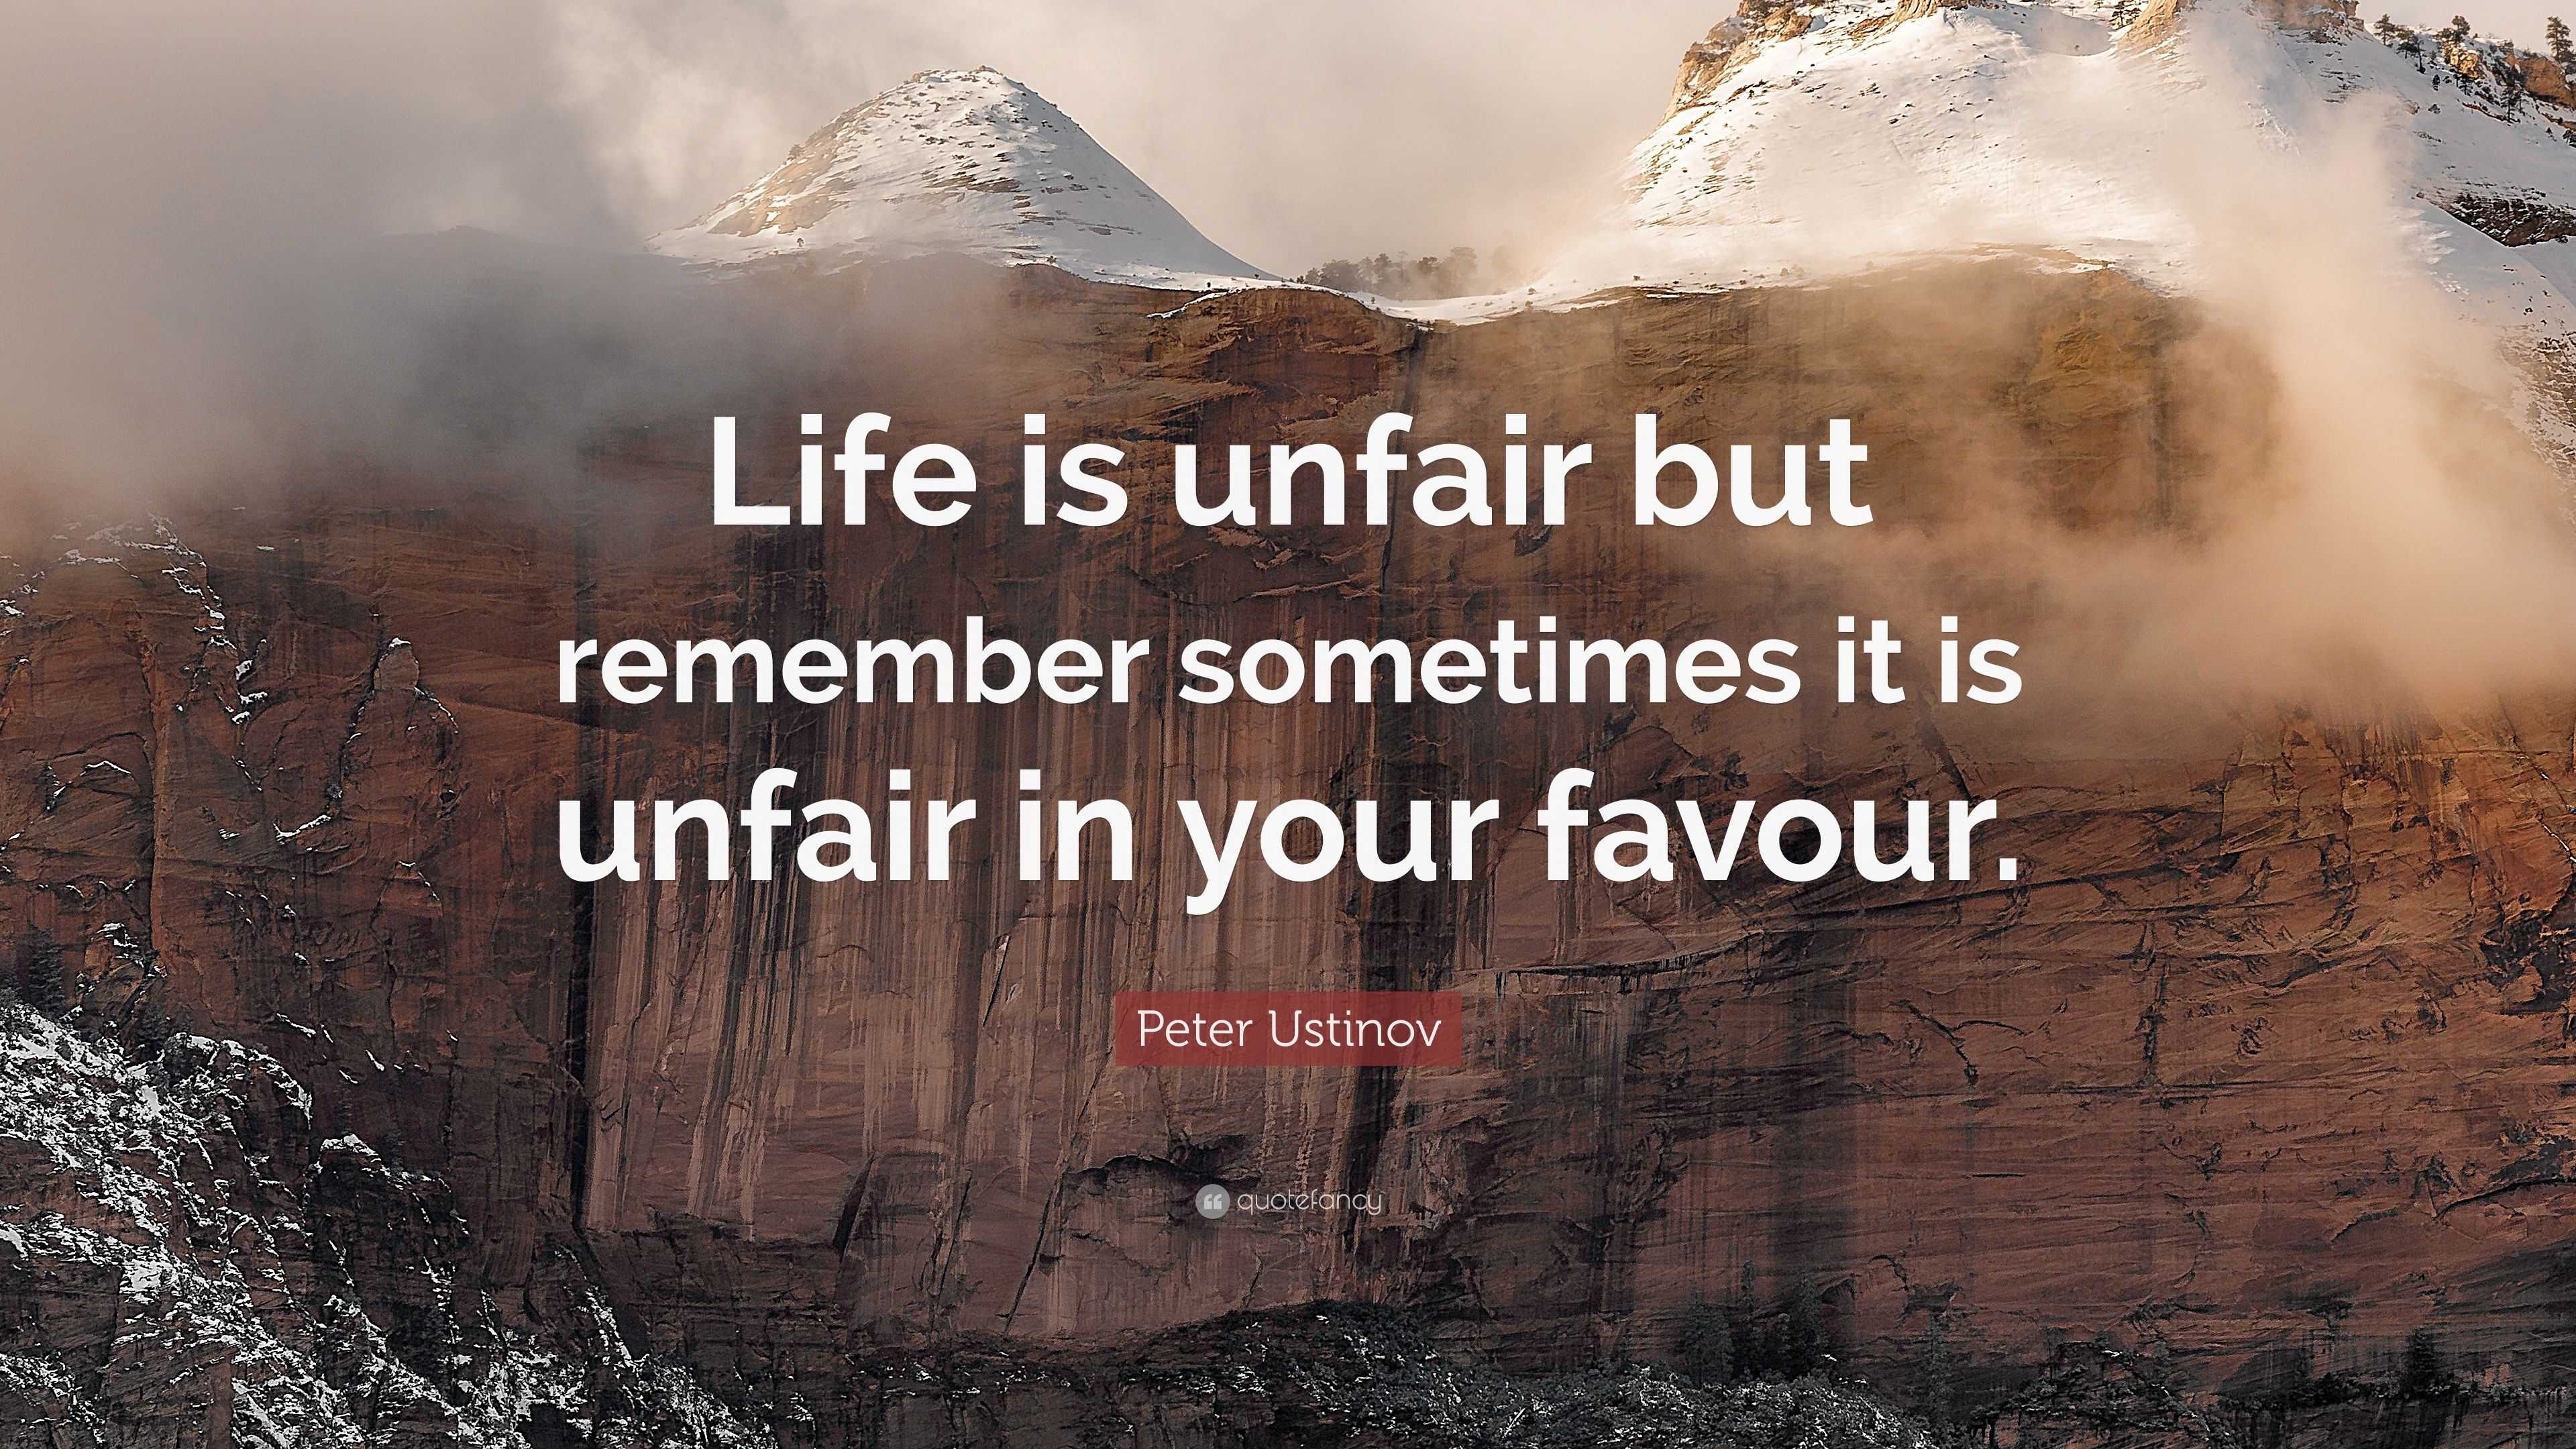 Peter Ustinov Quote: “Life is unfair but remember sometimes it is